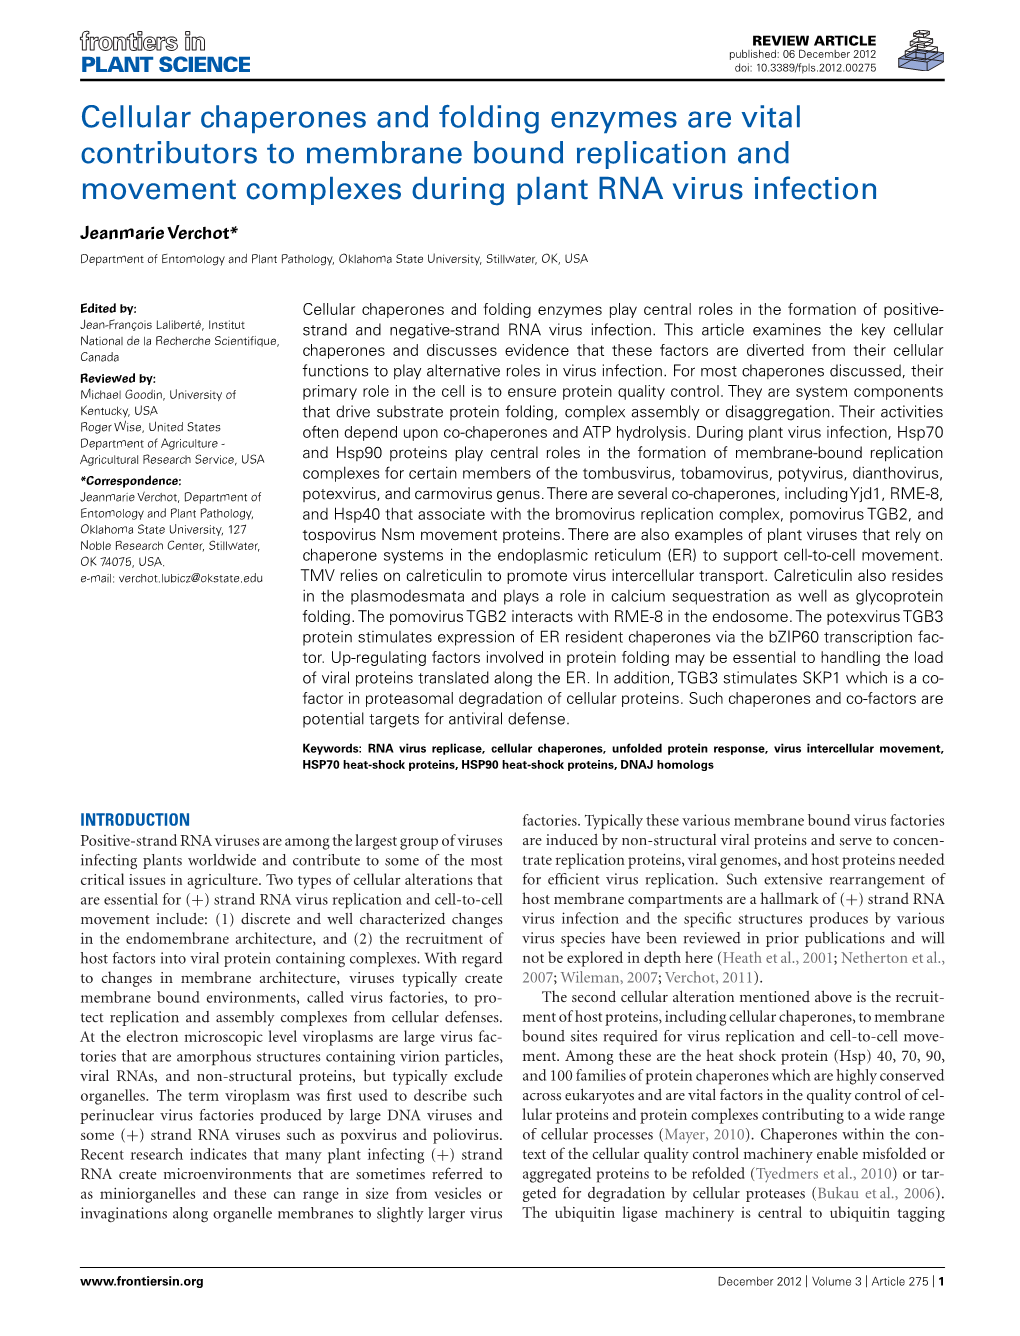 Cellular Chaperones and Folding Enzymes Are Vital Contributors to Membrane Bound Replication and Movement Complexes During Plant RNA Virus Infection